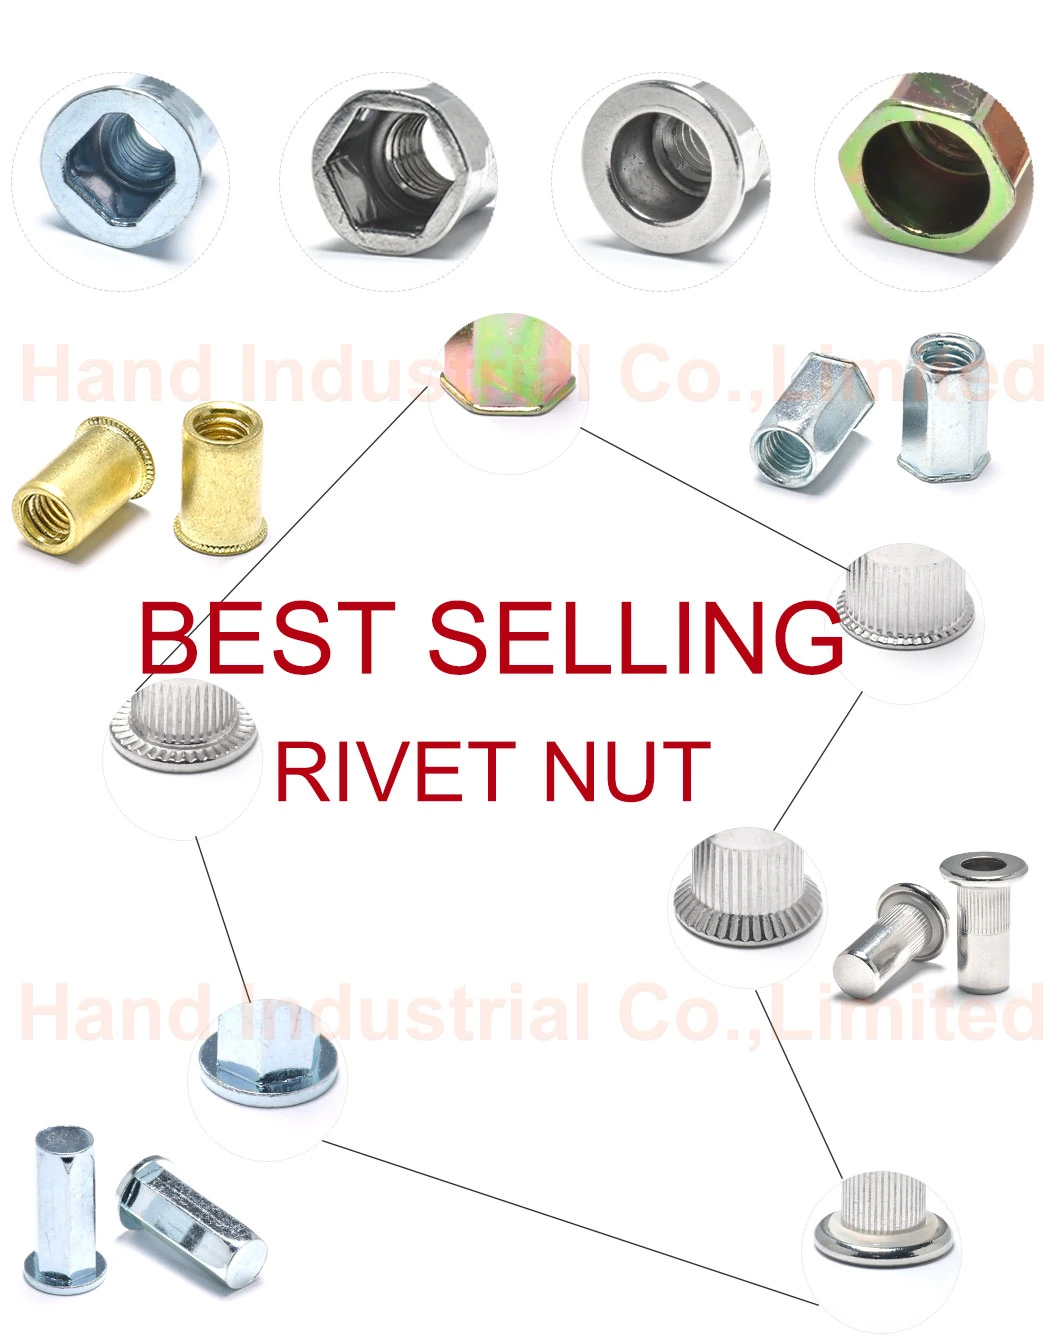 Reasonable Prices China Factory Price Al Flat Head Plain Body Rivet Nuts with Open End